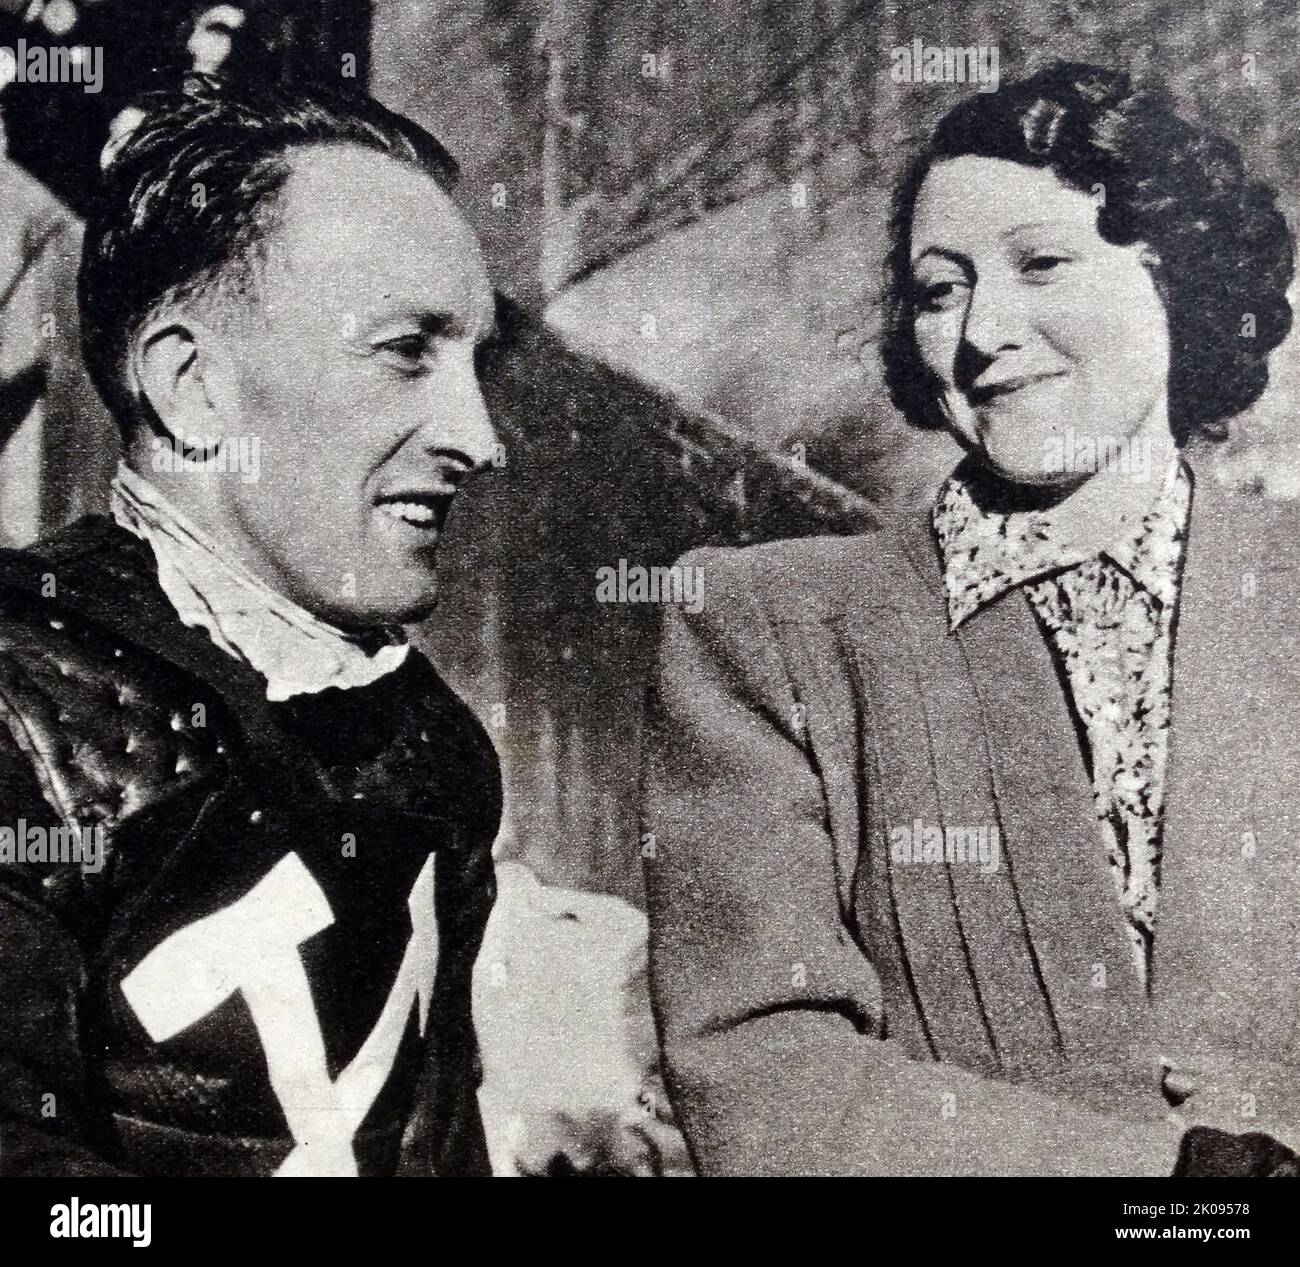 Speedway rider Tommy Croombs with his wife Josephine. Thomas Croombs (13 December 1906 - 15 October 1980) was a Speedway rider who finished third in the Star Riders' Championship in 1931, the forerunner to the Speedway World Championship. He rode for Lea Bridge in 1929 and moved onto the West Ham Hammers in 1930. Illustrated news. Stock Photo